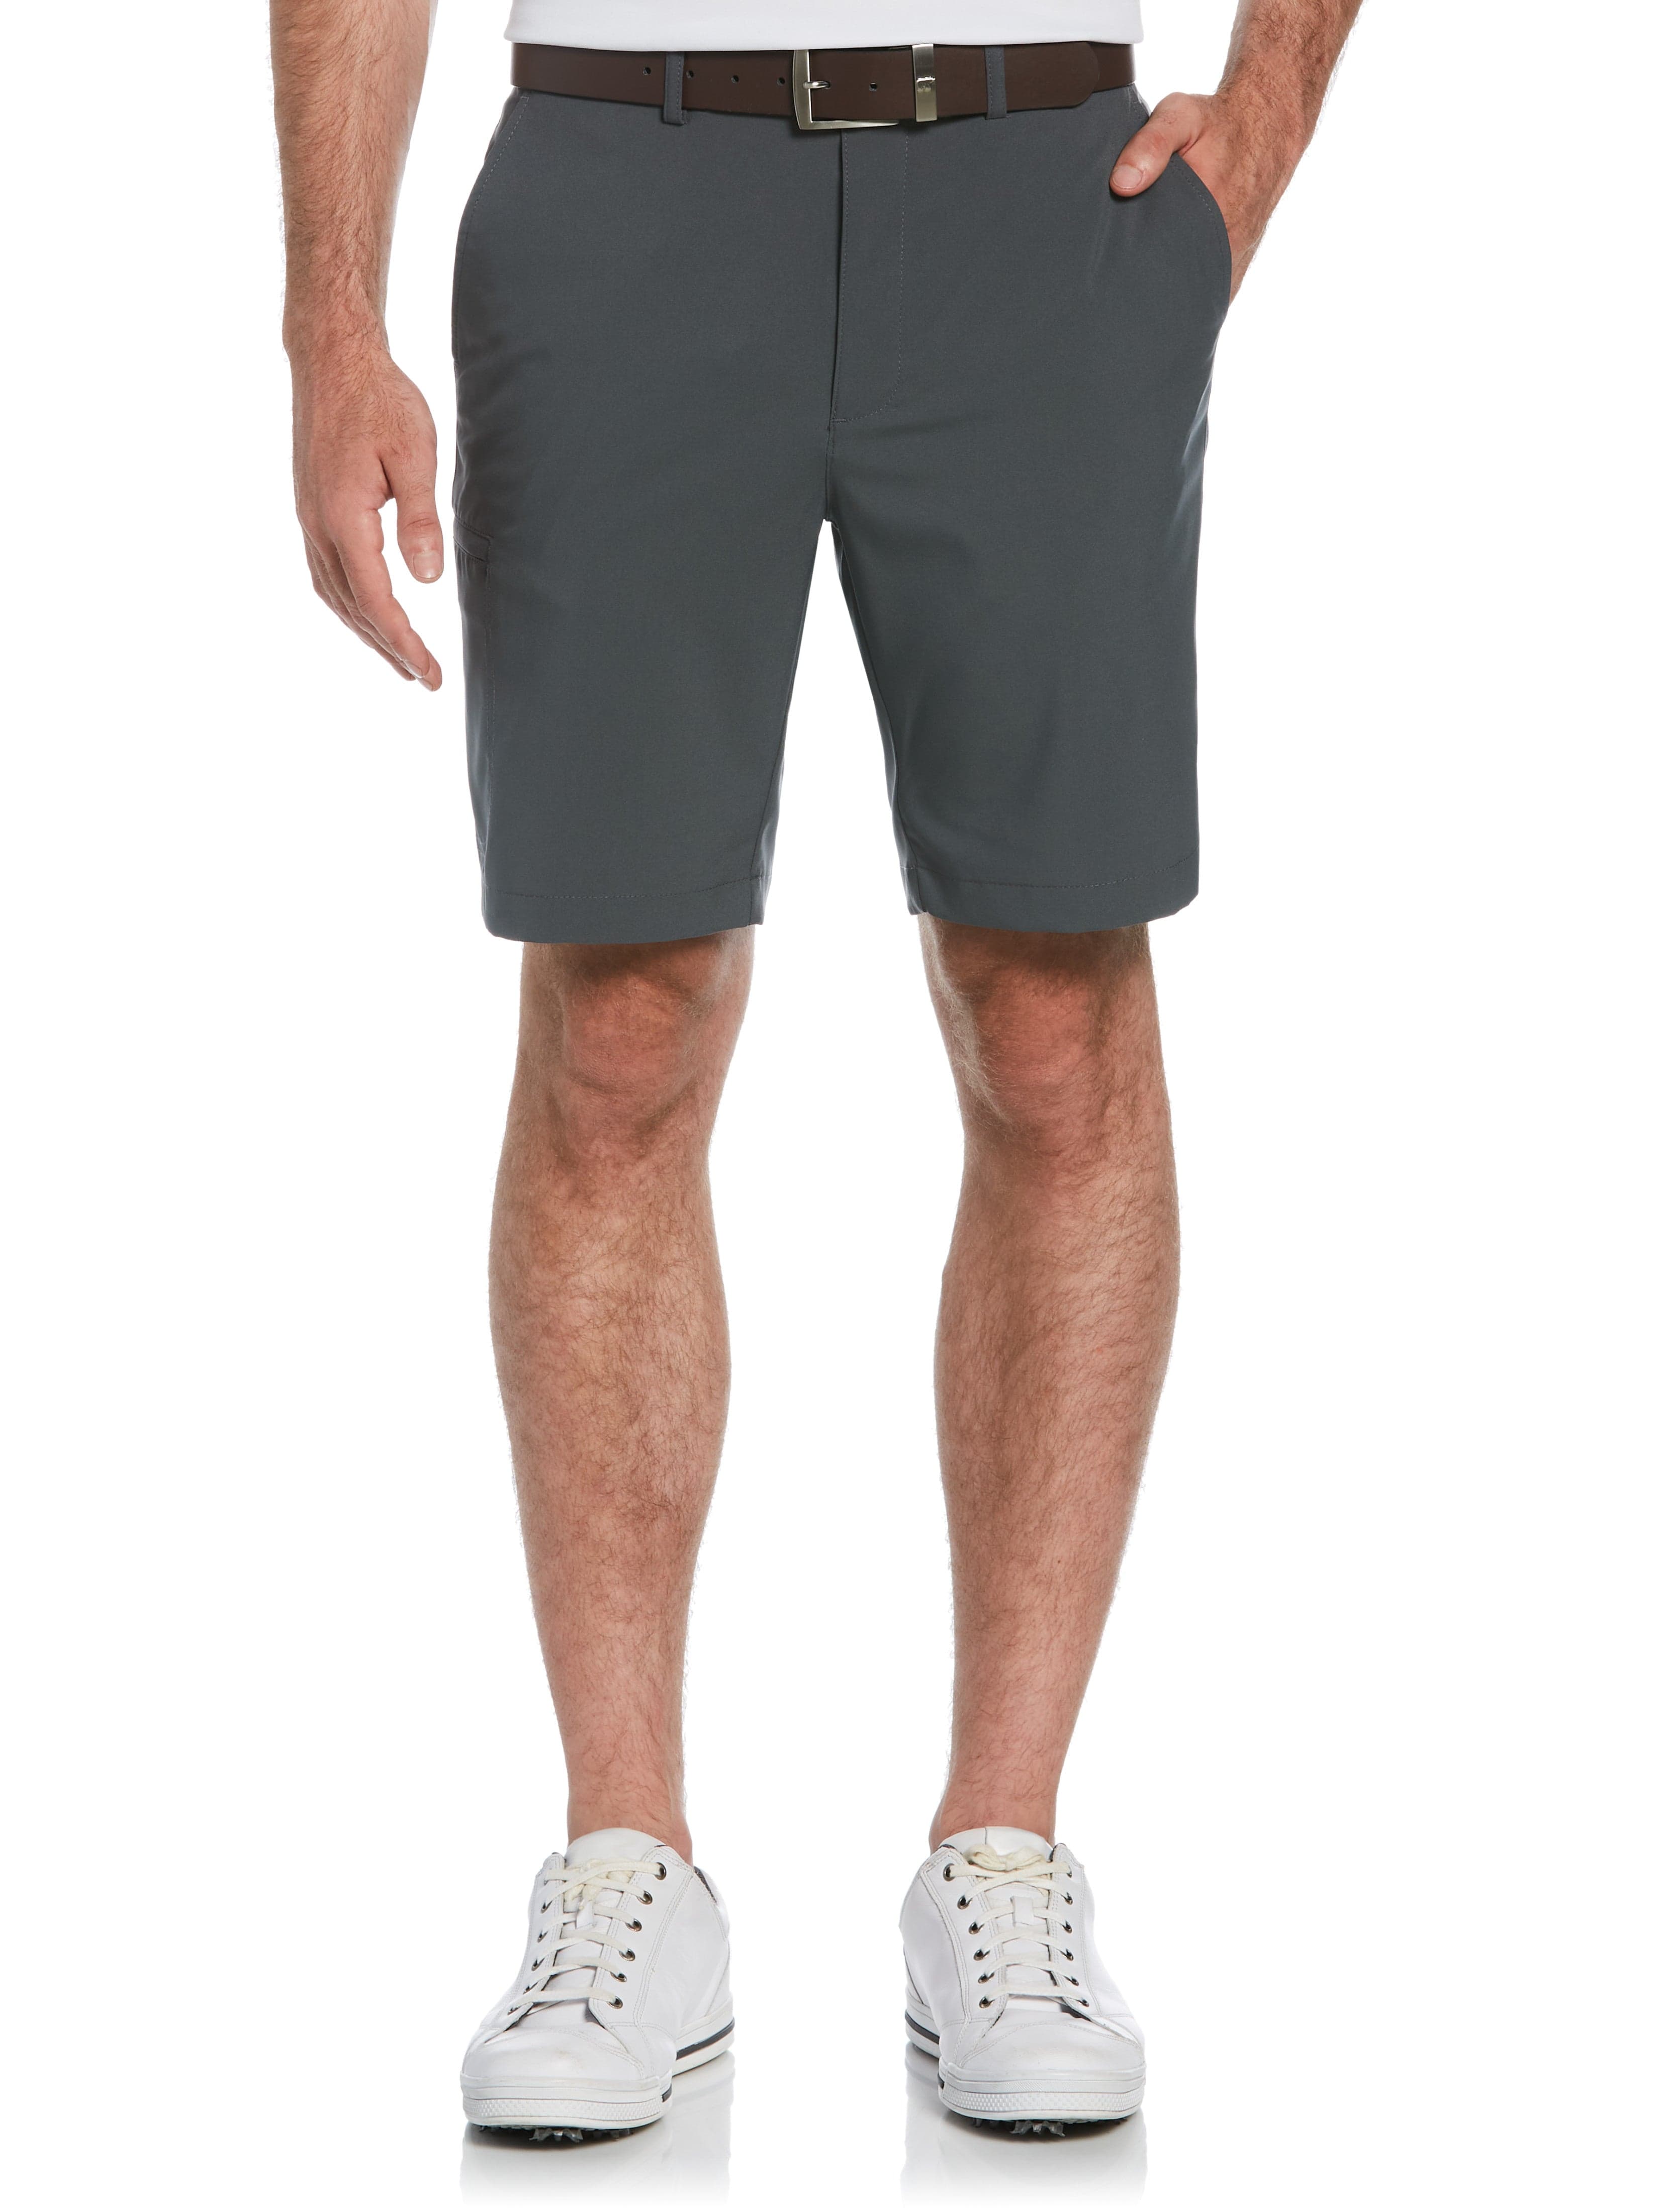 Jack Nicklaus Mens Flat Front Solid Golf Shorts w/ Cargo Pocket, Size 32, Iron Gate Gray, 100% Polyester | Golf Apparel Shop